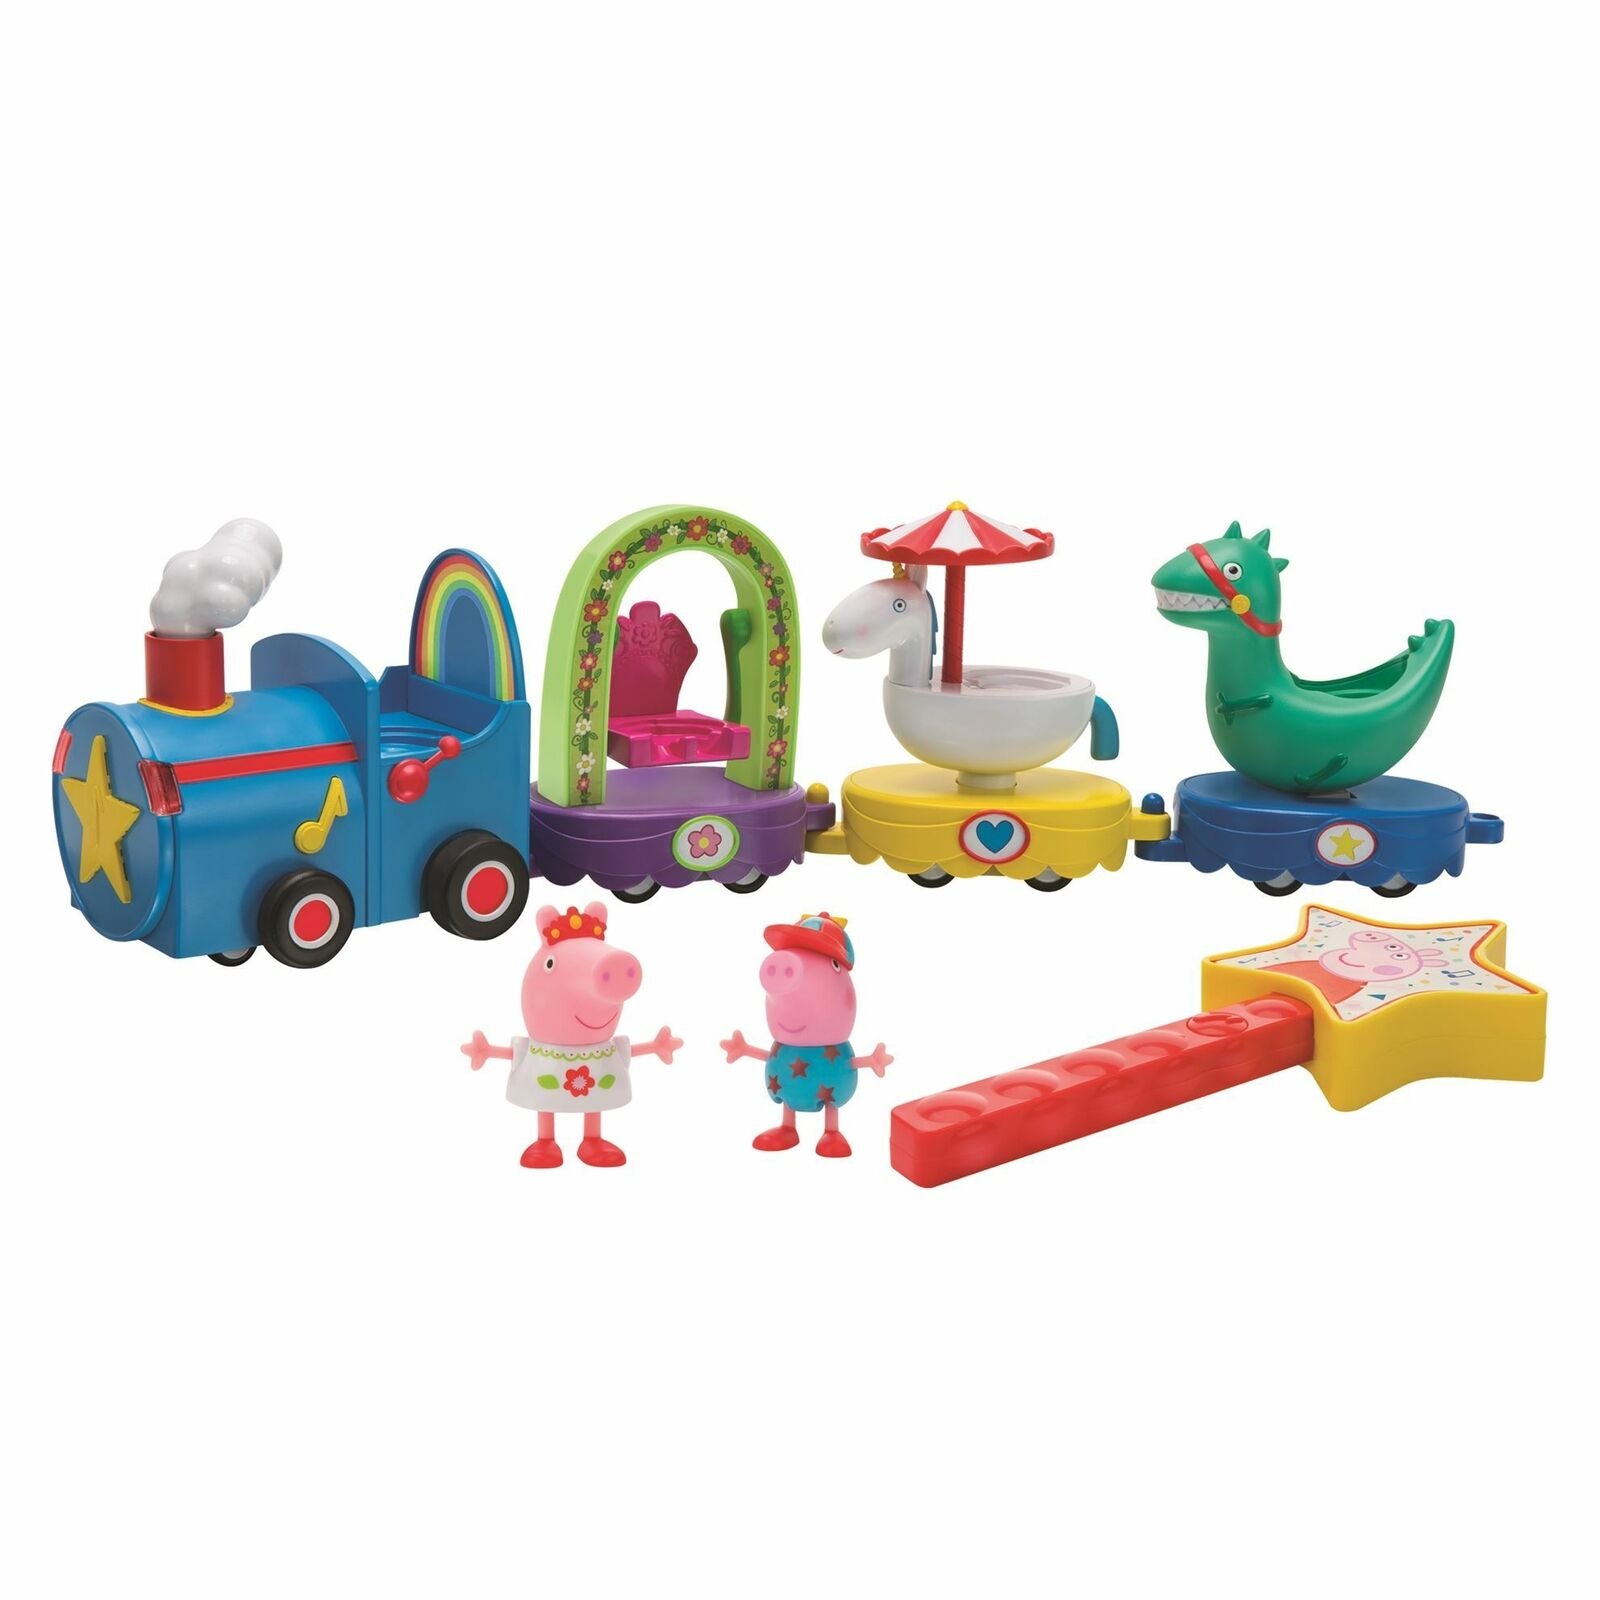 PEP0635 Peppa Pig Peppa's Magical Parade Playset with Figures Age 2+